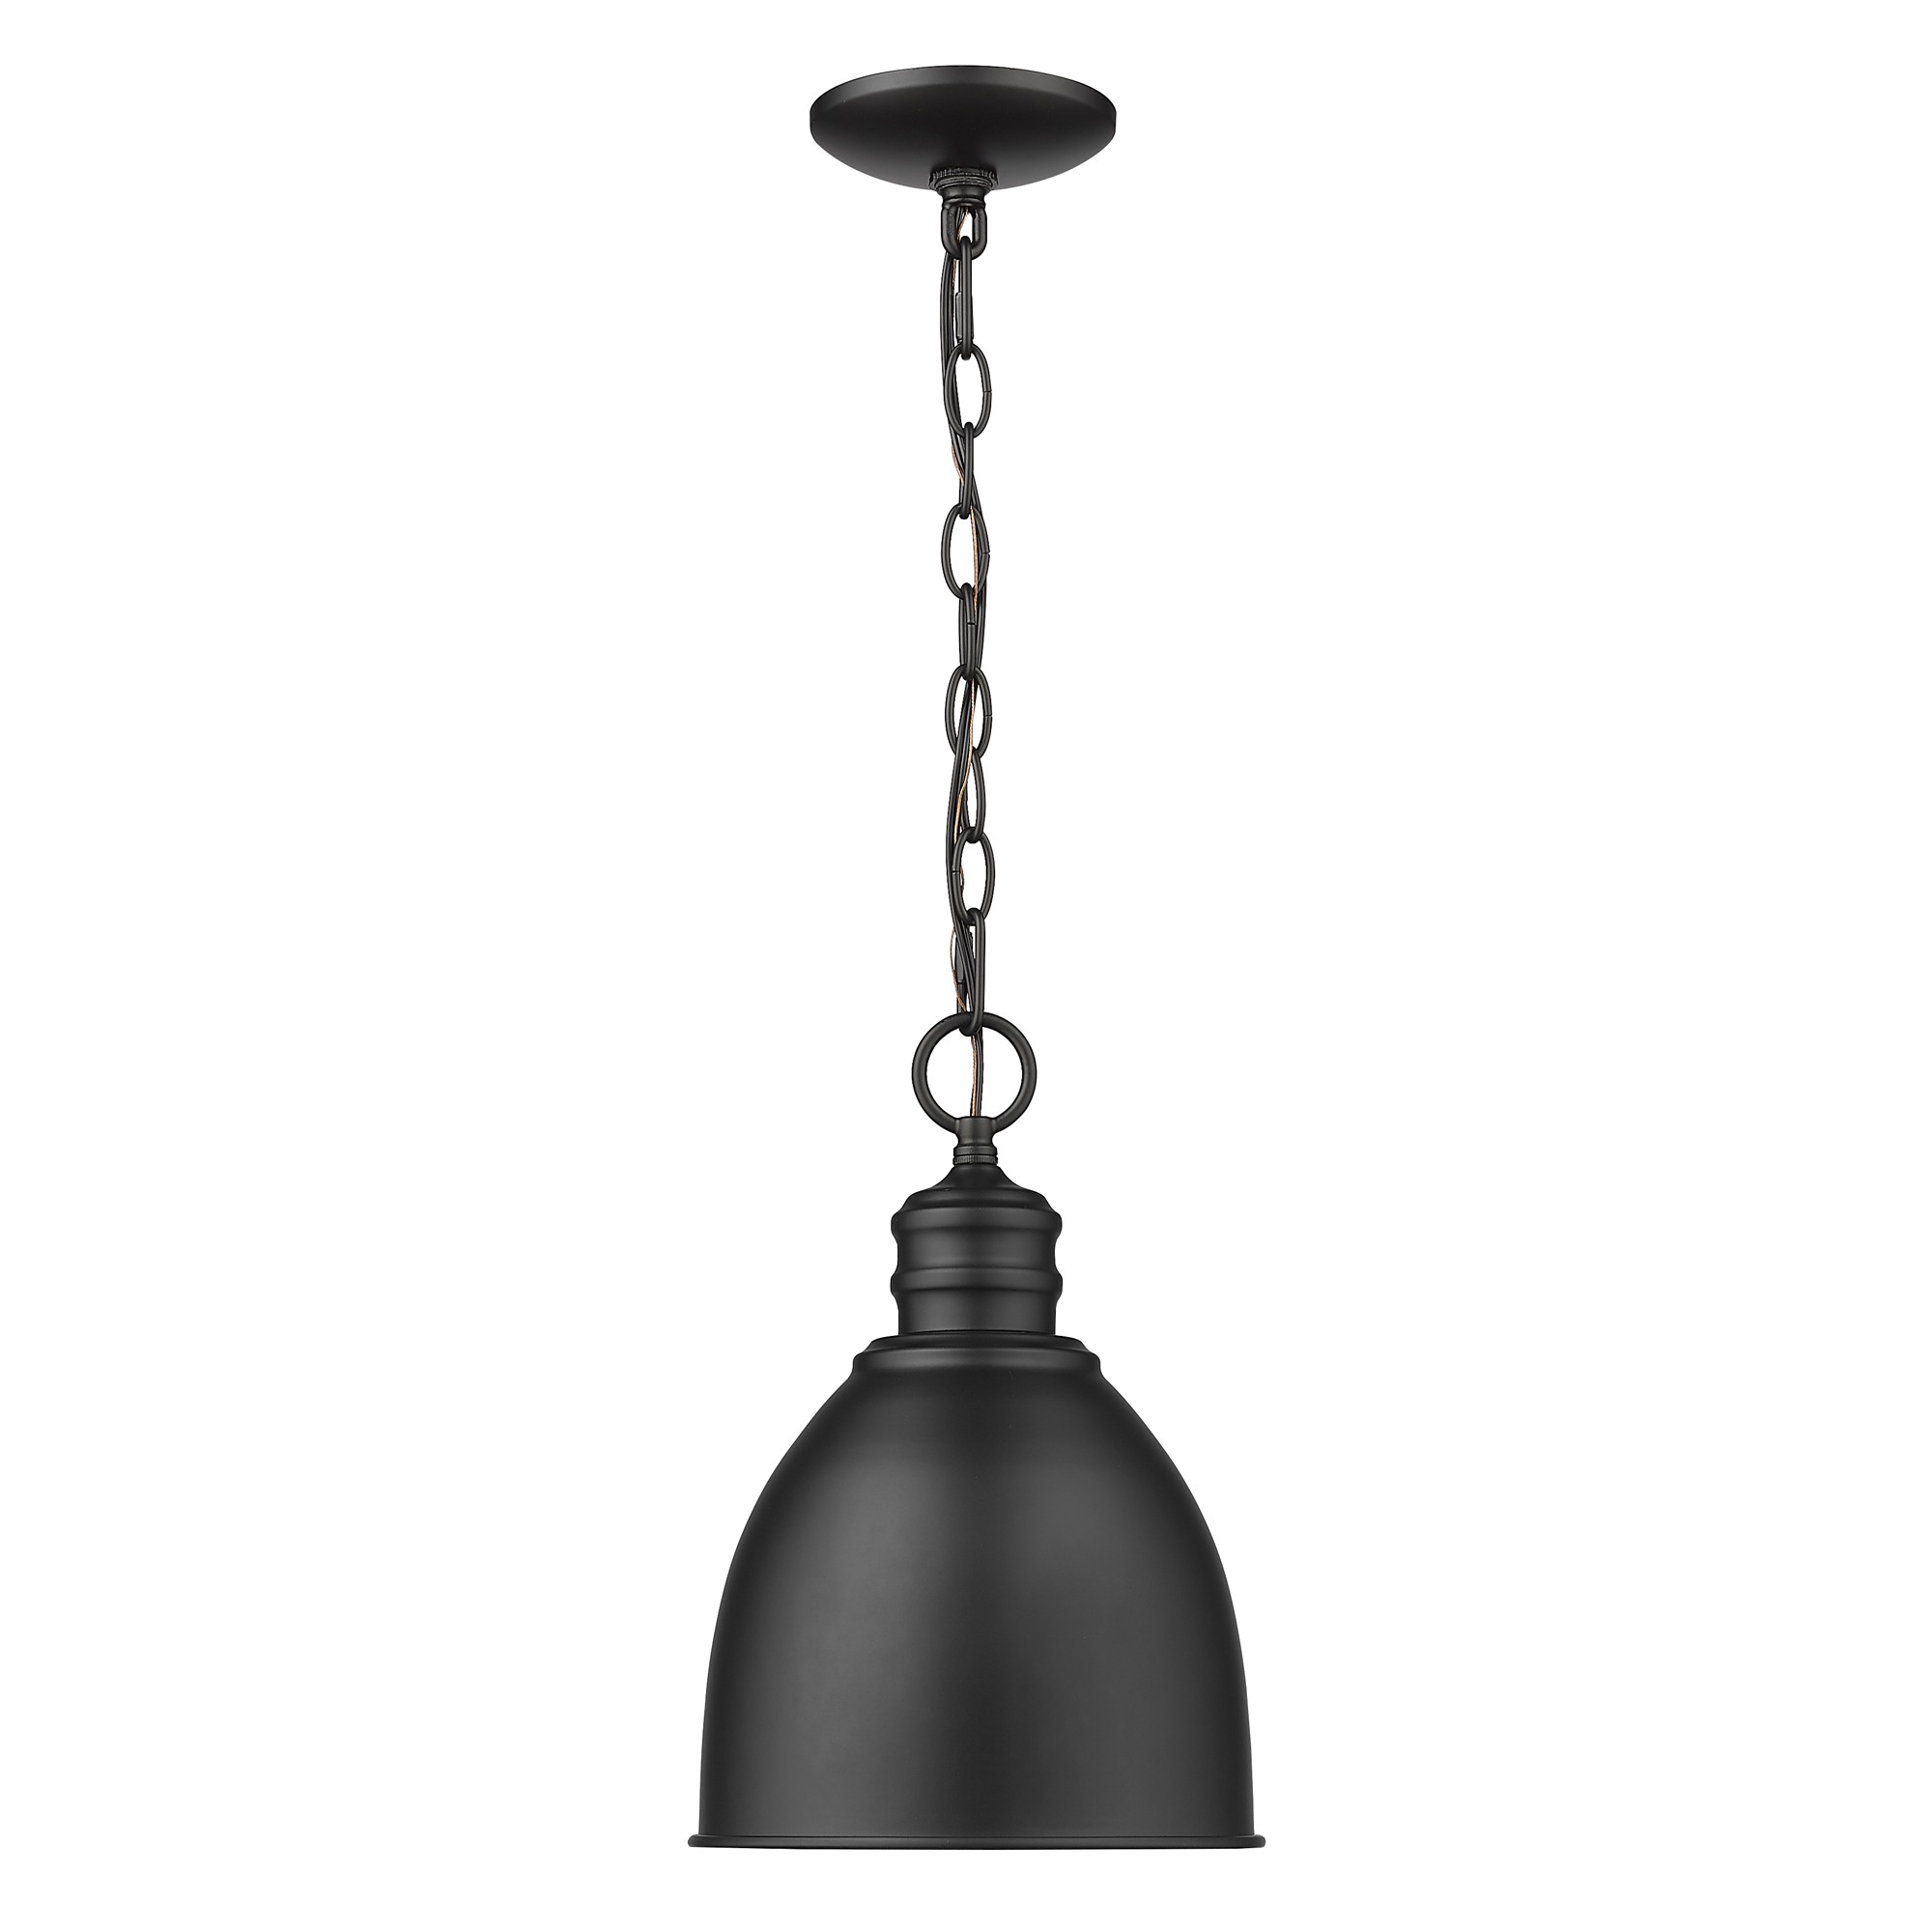 Acclaim Lighting IN11171BK 13.25 in. Colby 1-Light Matte Black Pendant with Gloss White Interior Shade - image 3 of 3